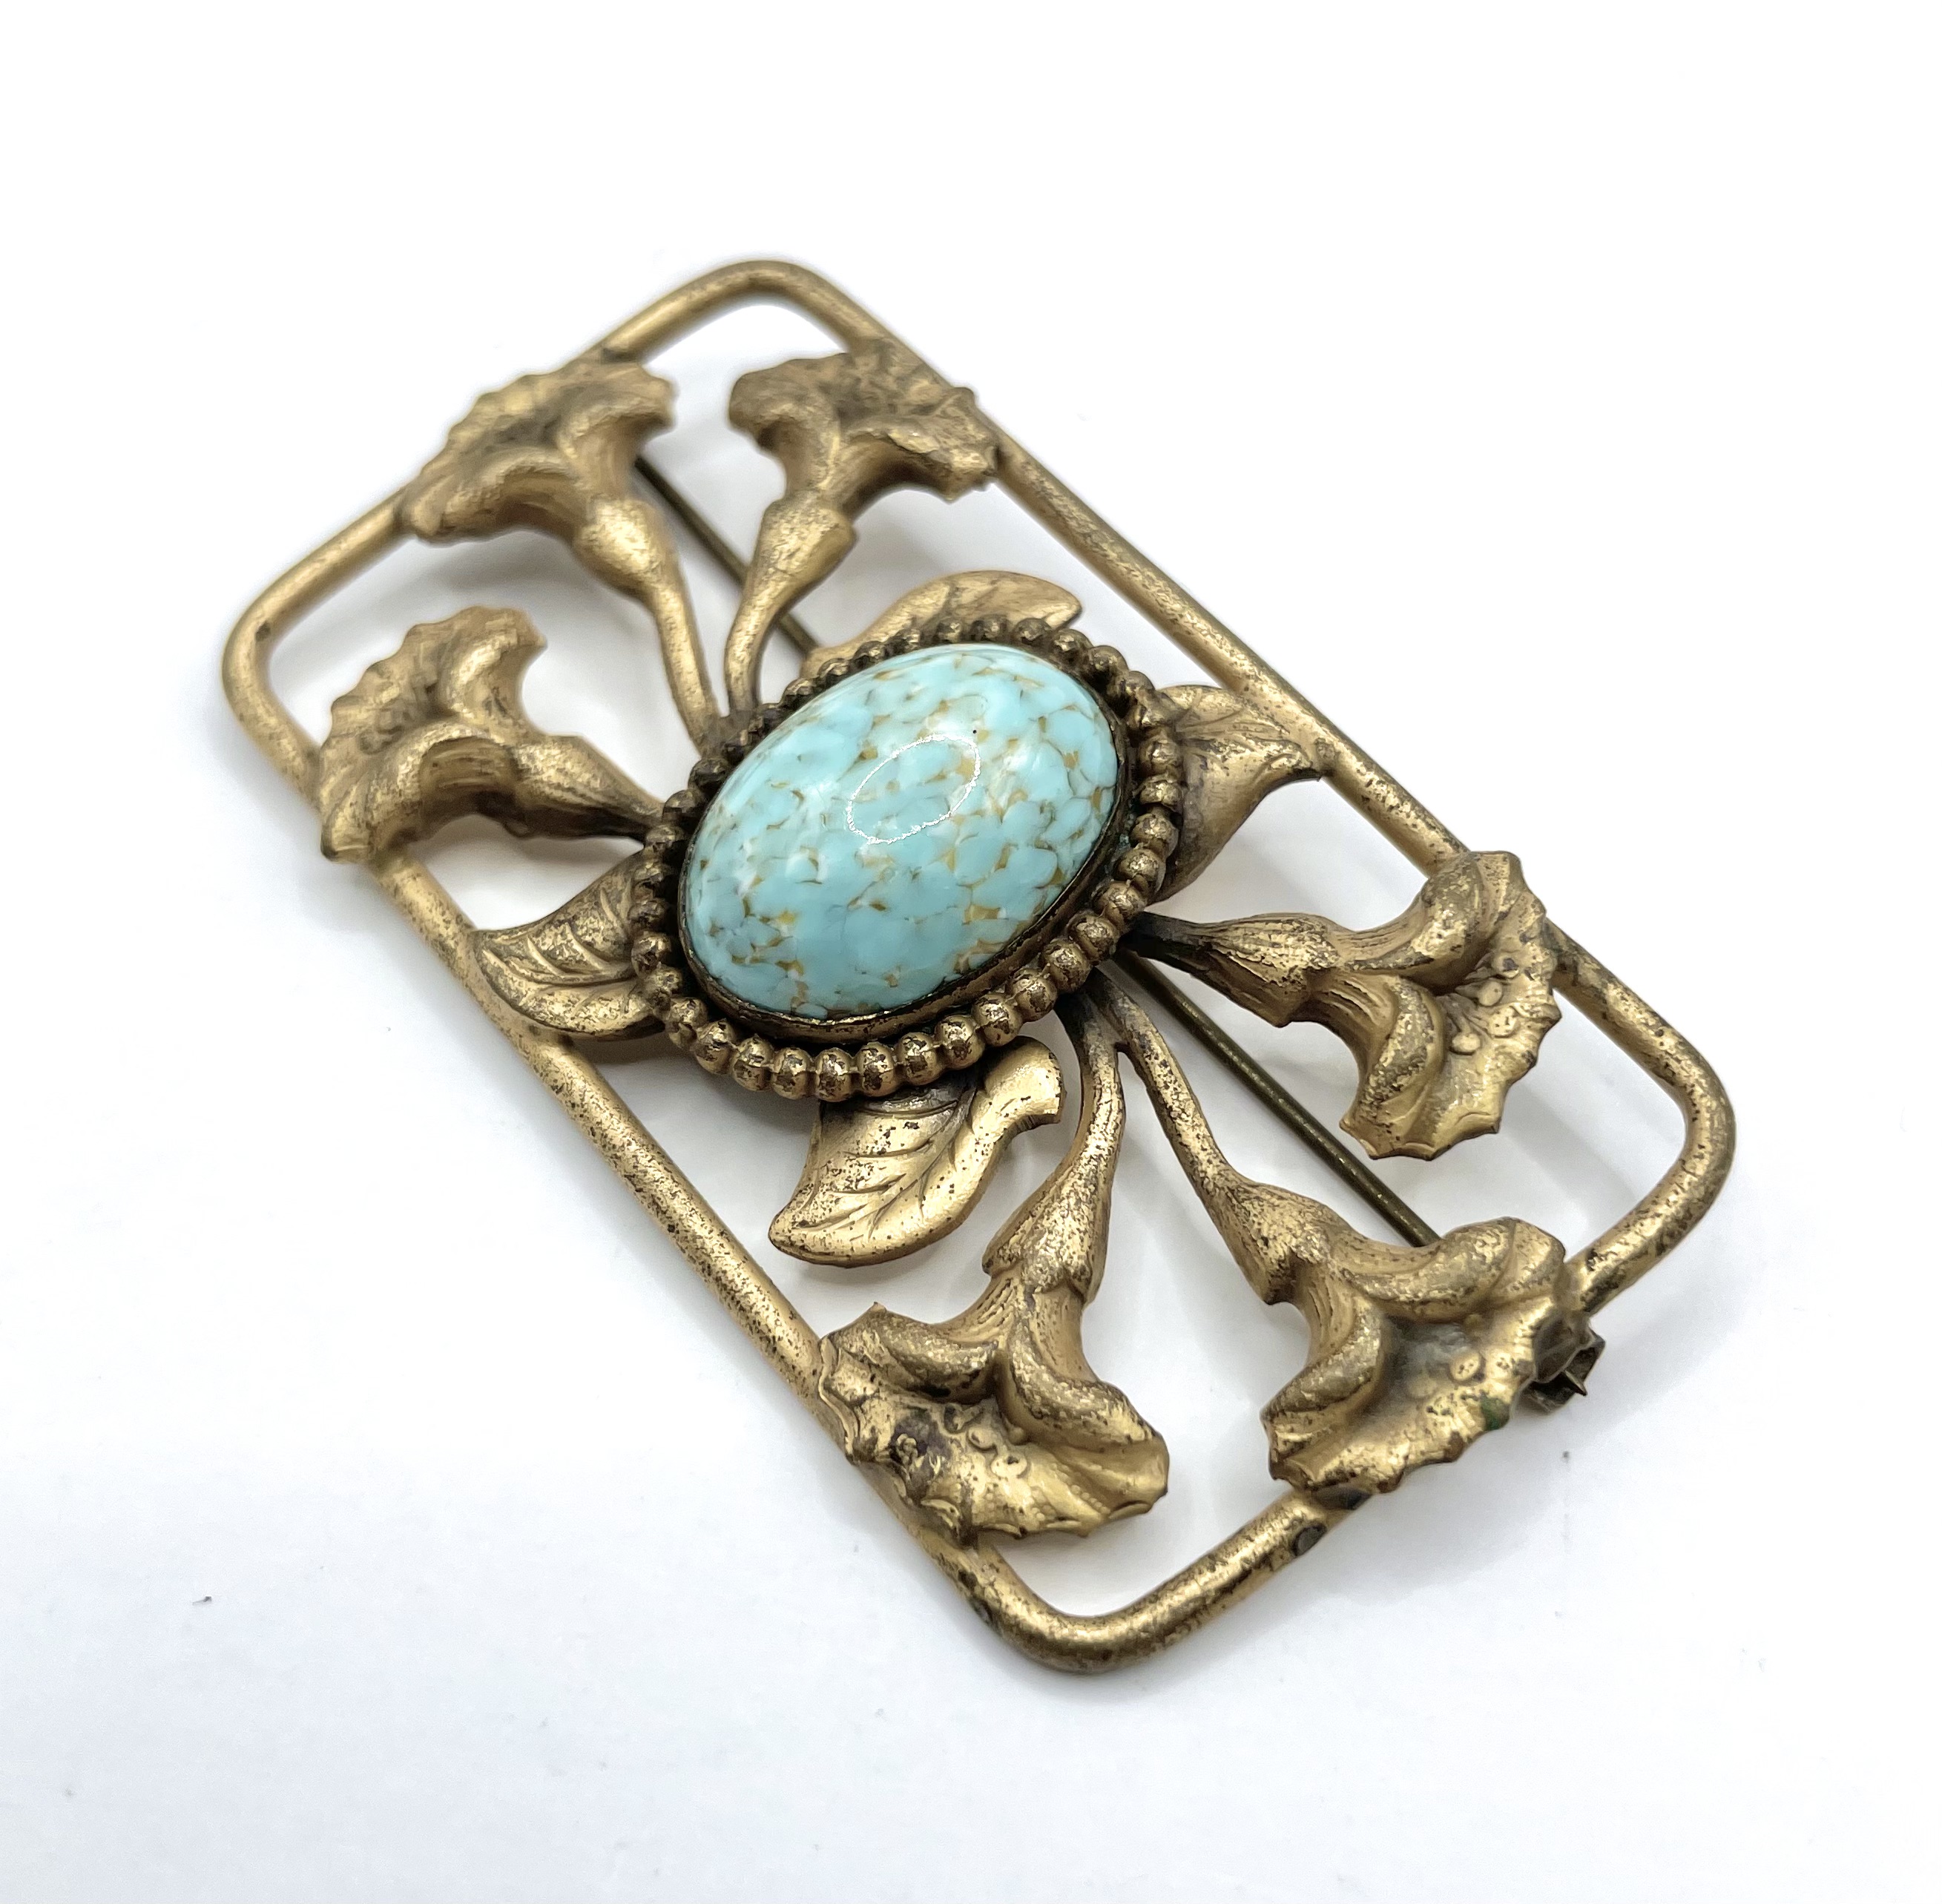 Antique lily flower brooch